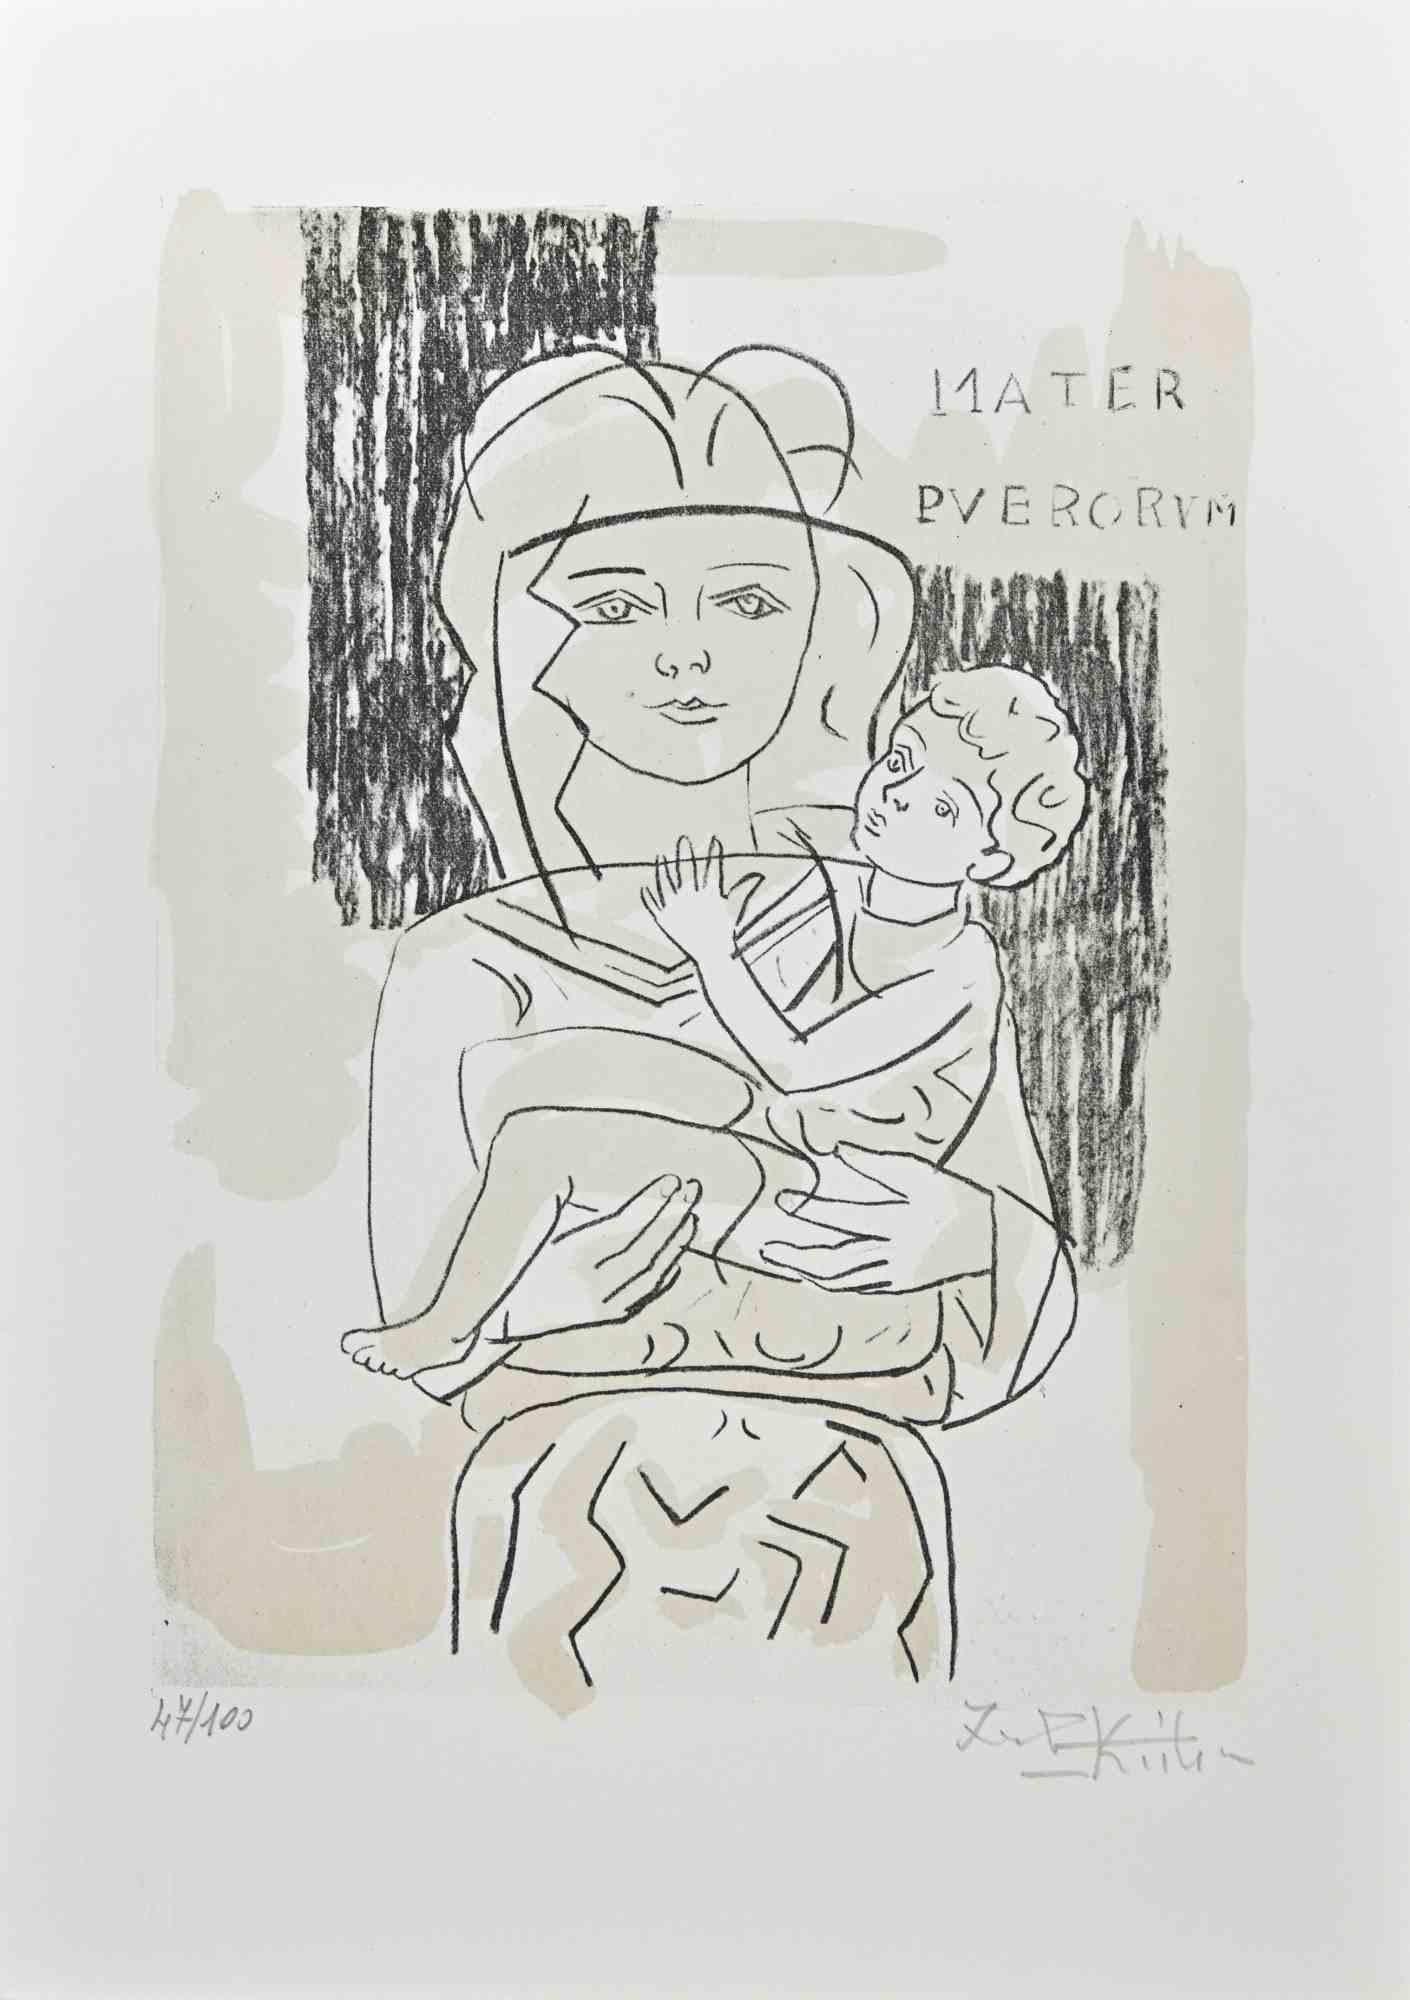 Motherhood is a Lithograph realized in the 1980s by Ibrahim Kodra.

Good conditions.

Hand-signed.

Numbered. Edition,47/100.

The artwork is depicted through soft strokes in a well-balanced composition.